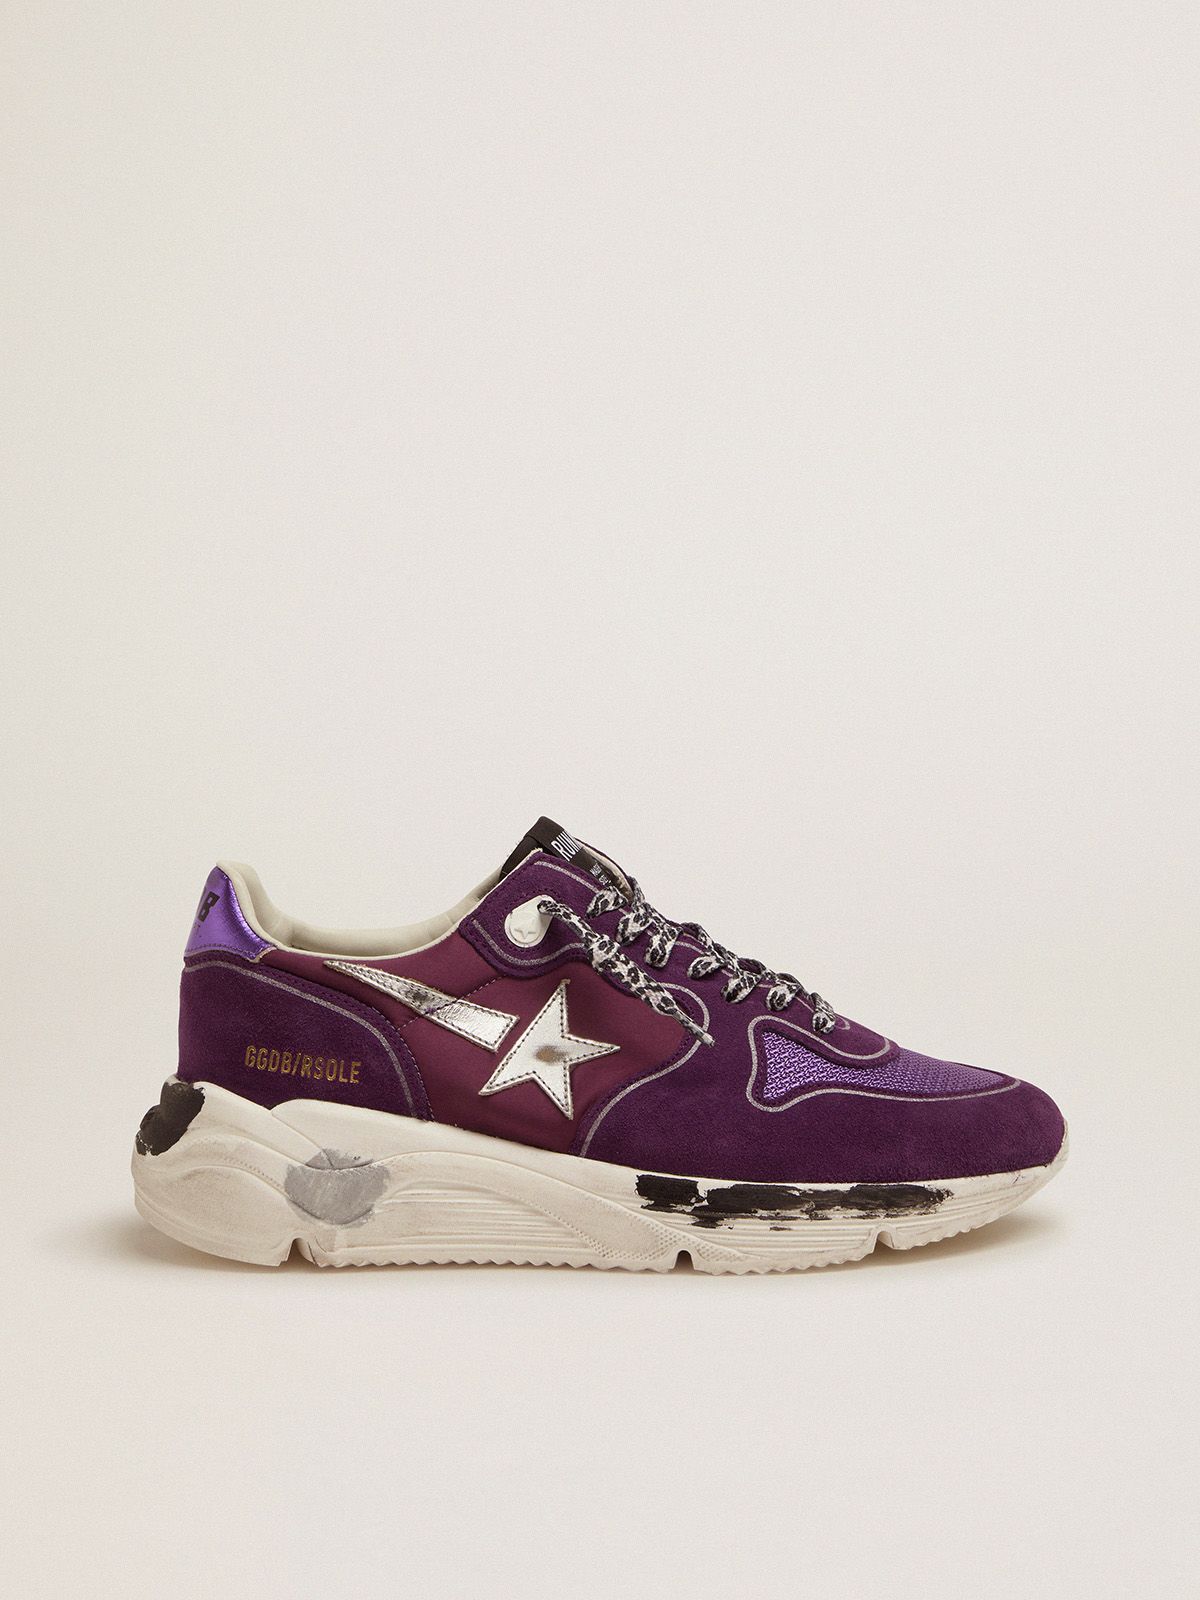 golden goose mesh heel metallic and tab Suede, leather with purple sneakers Sole Running